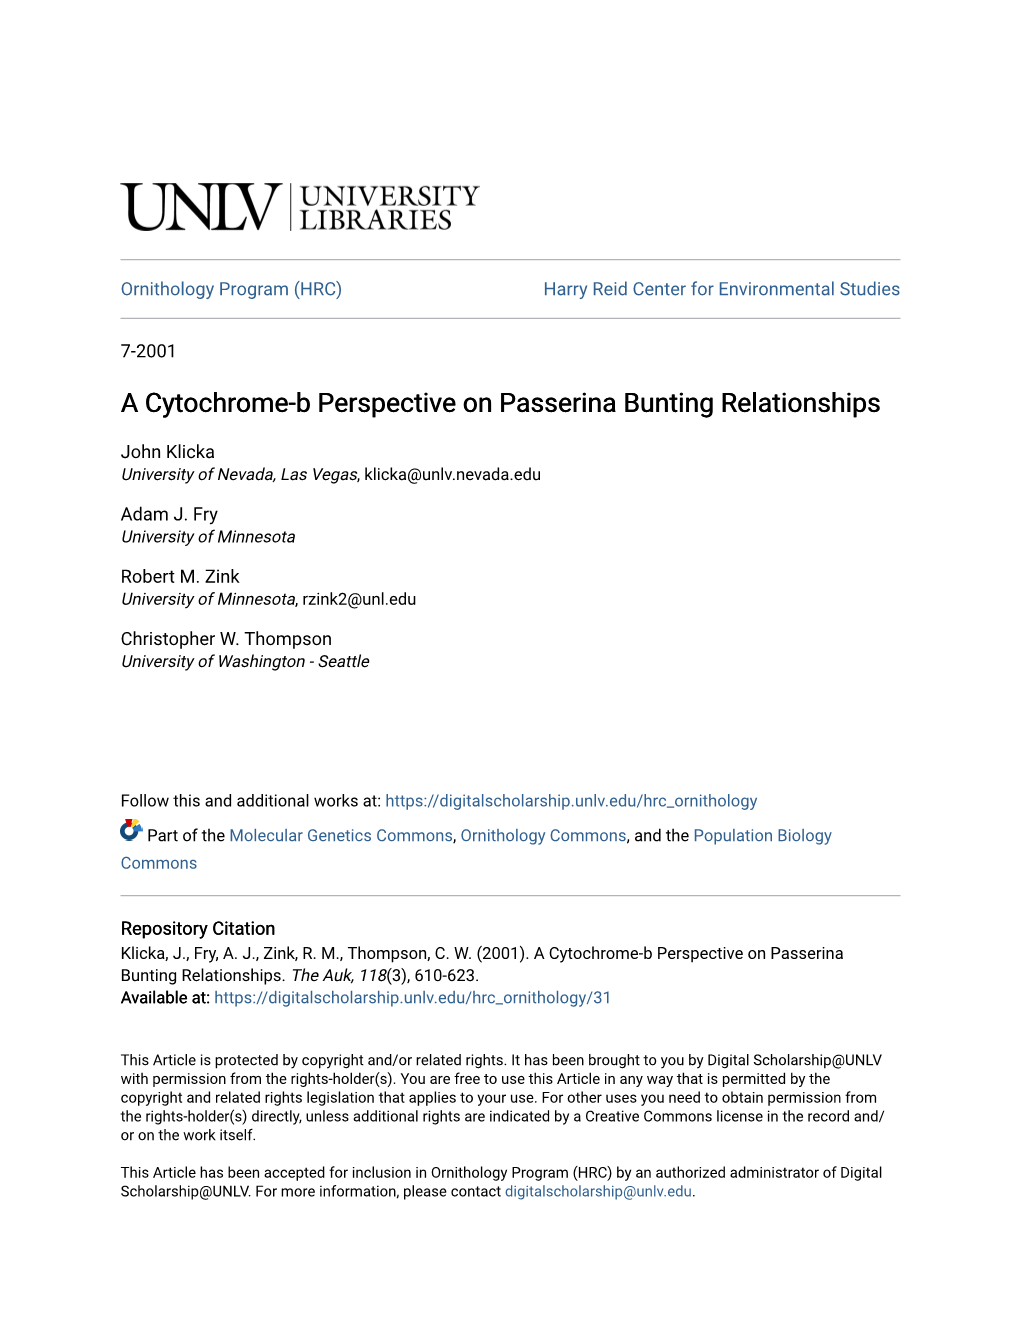 A Cytochrome-B Perspective on Passerina Bunting Relationships